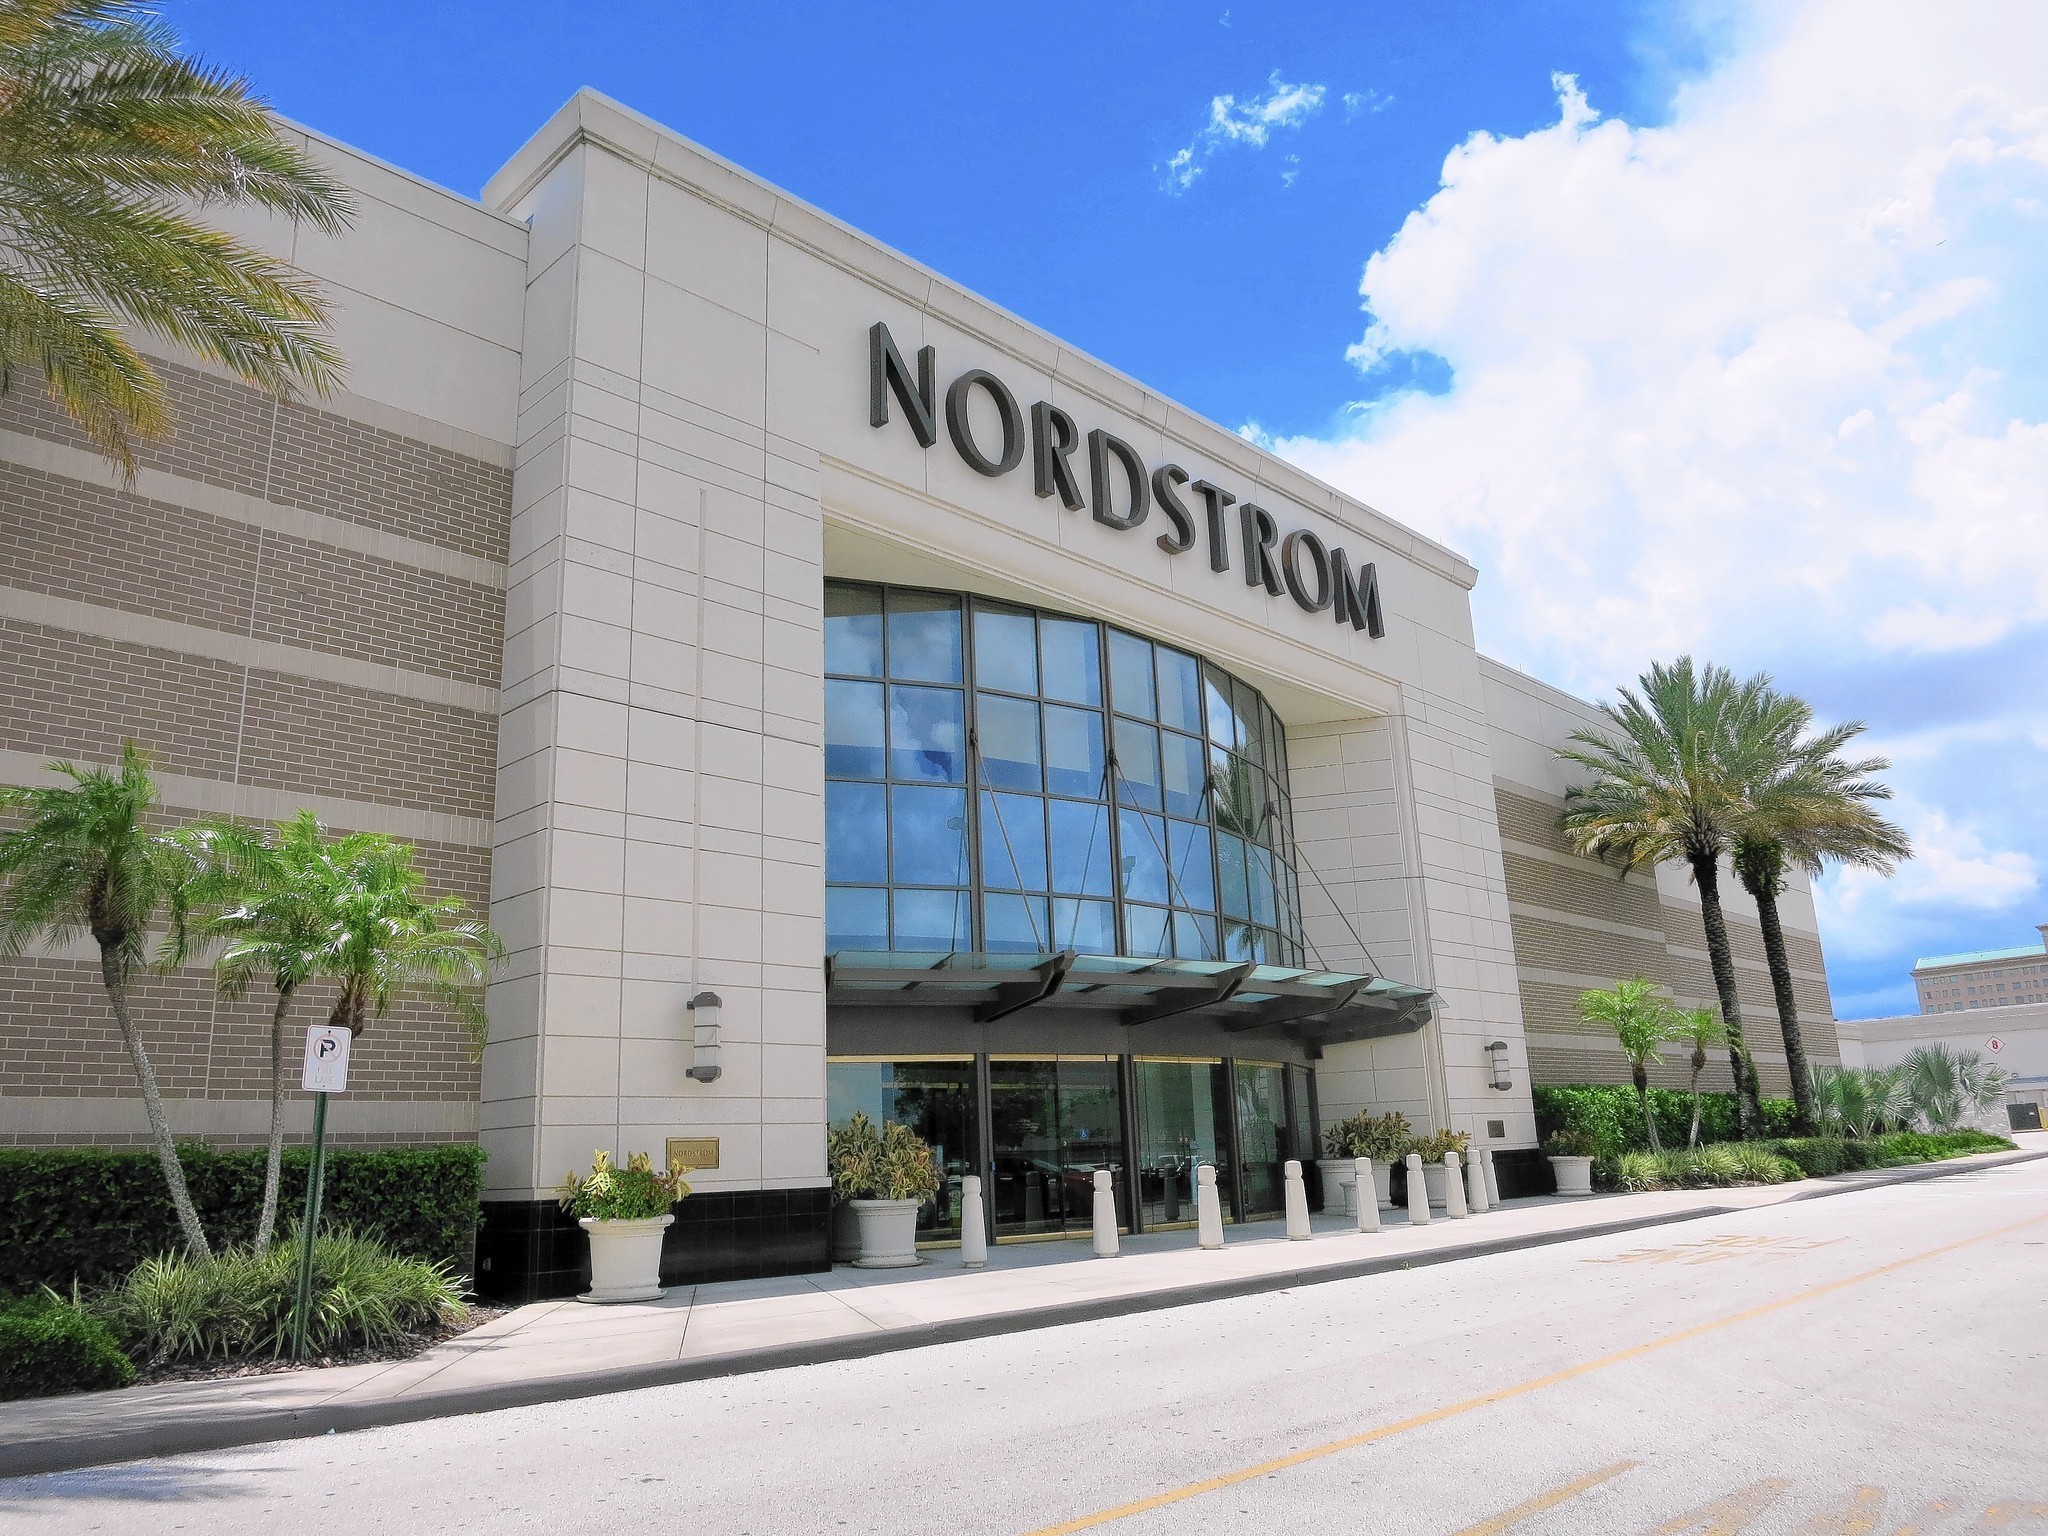 Nordstrom fell to upscale and outlet 